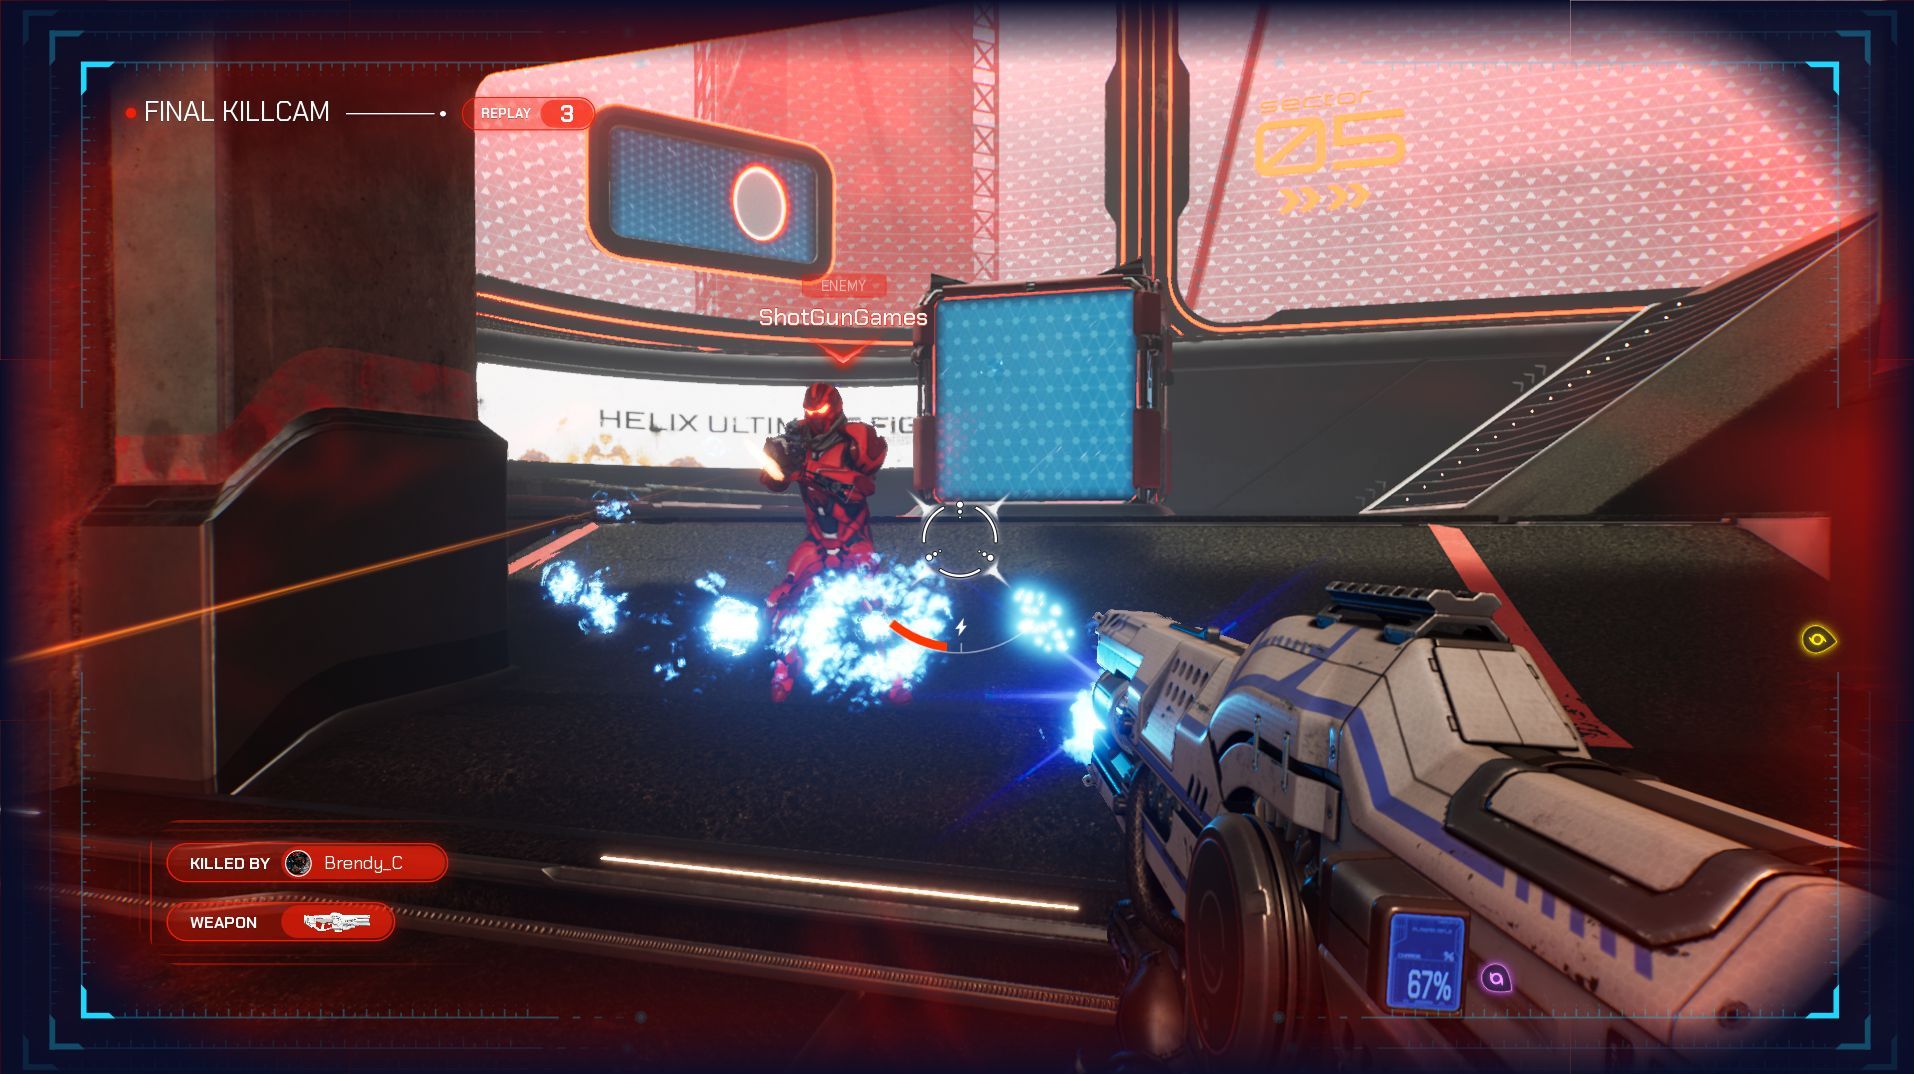 The player fires their gun at another competitor in Splitgate